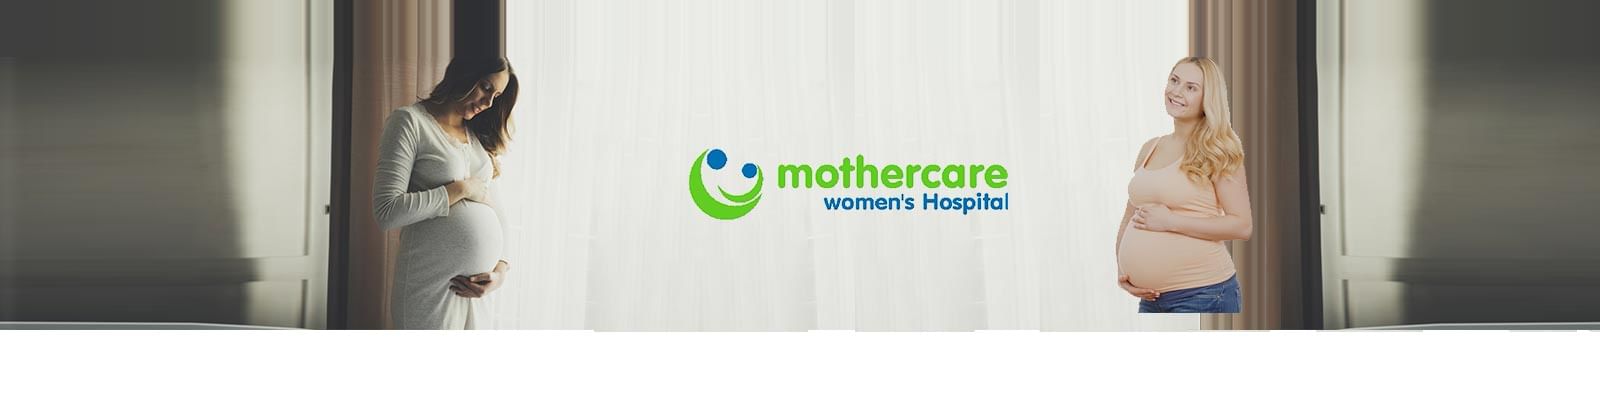 Mothercare IVF Center